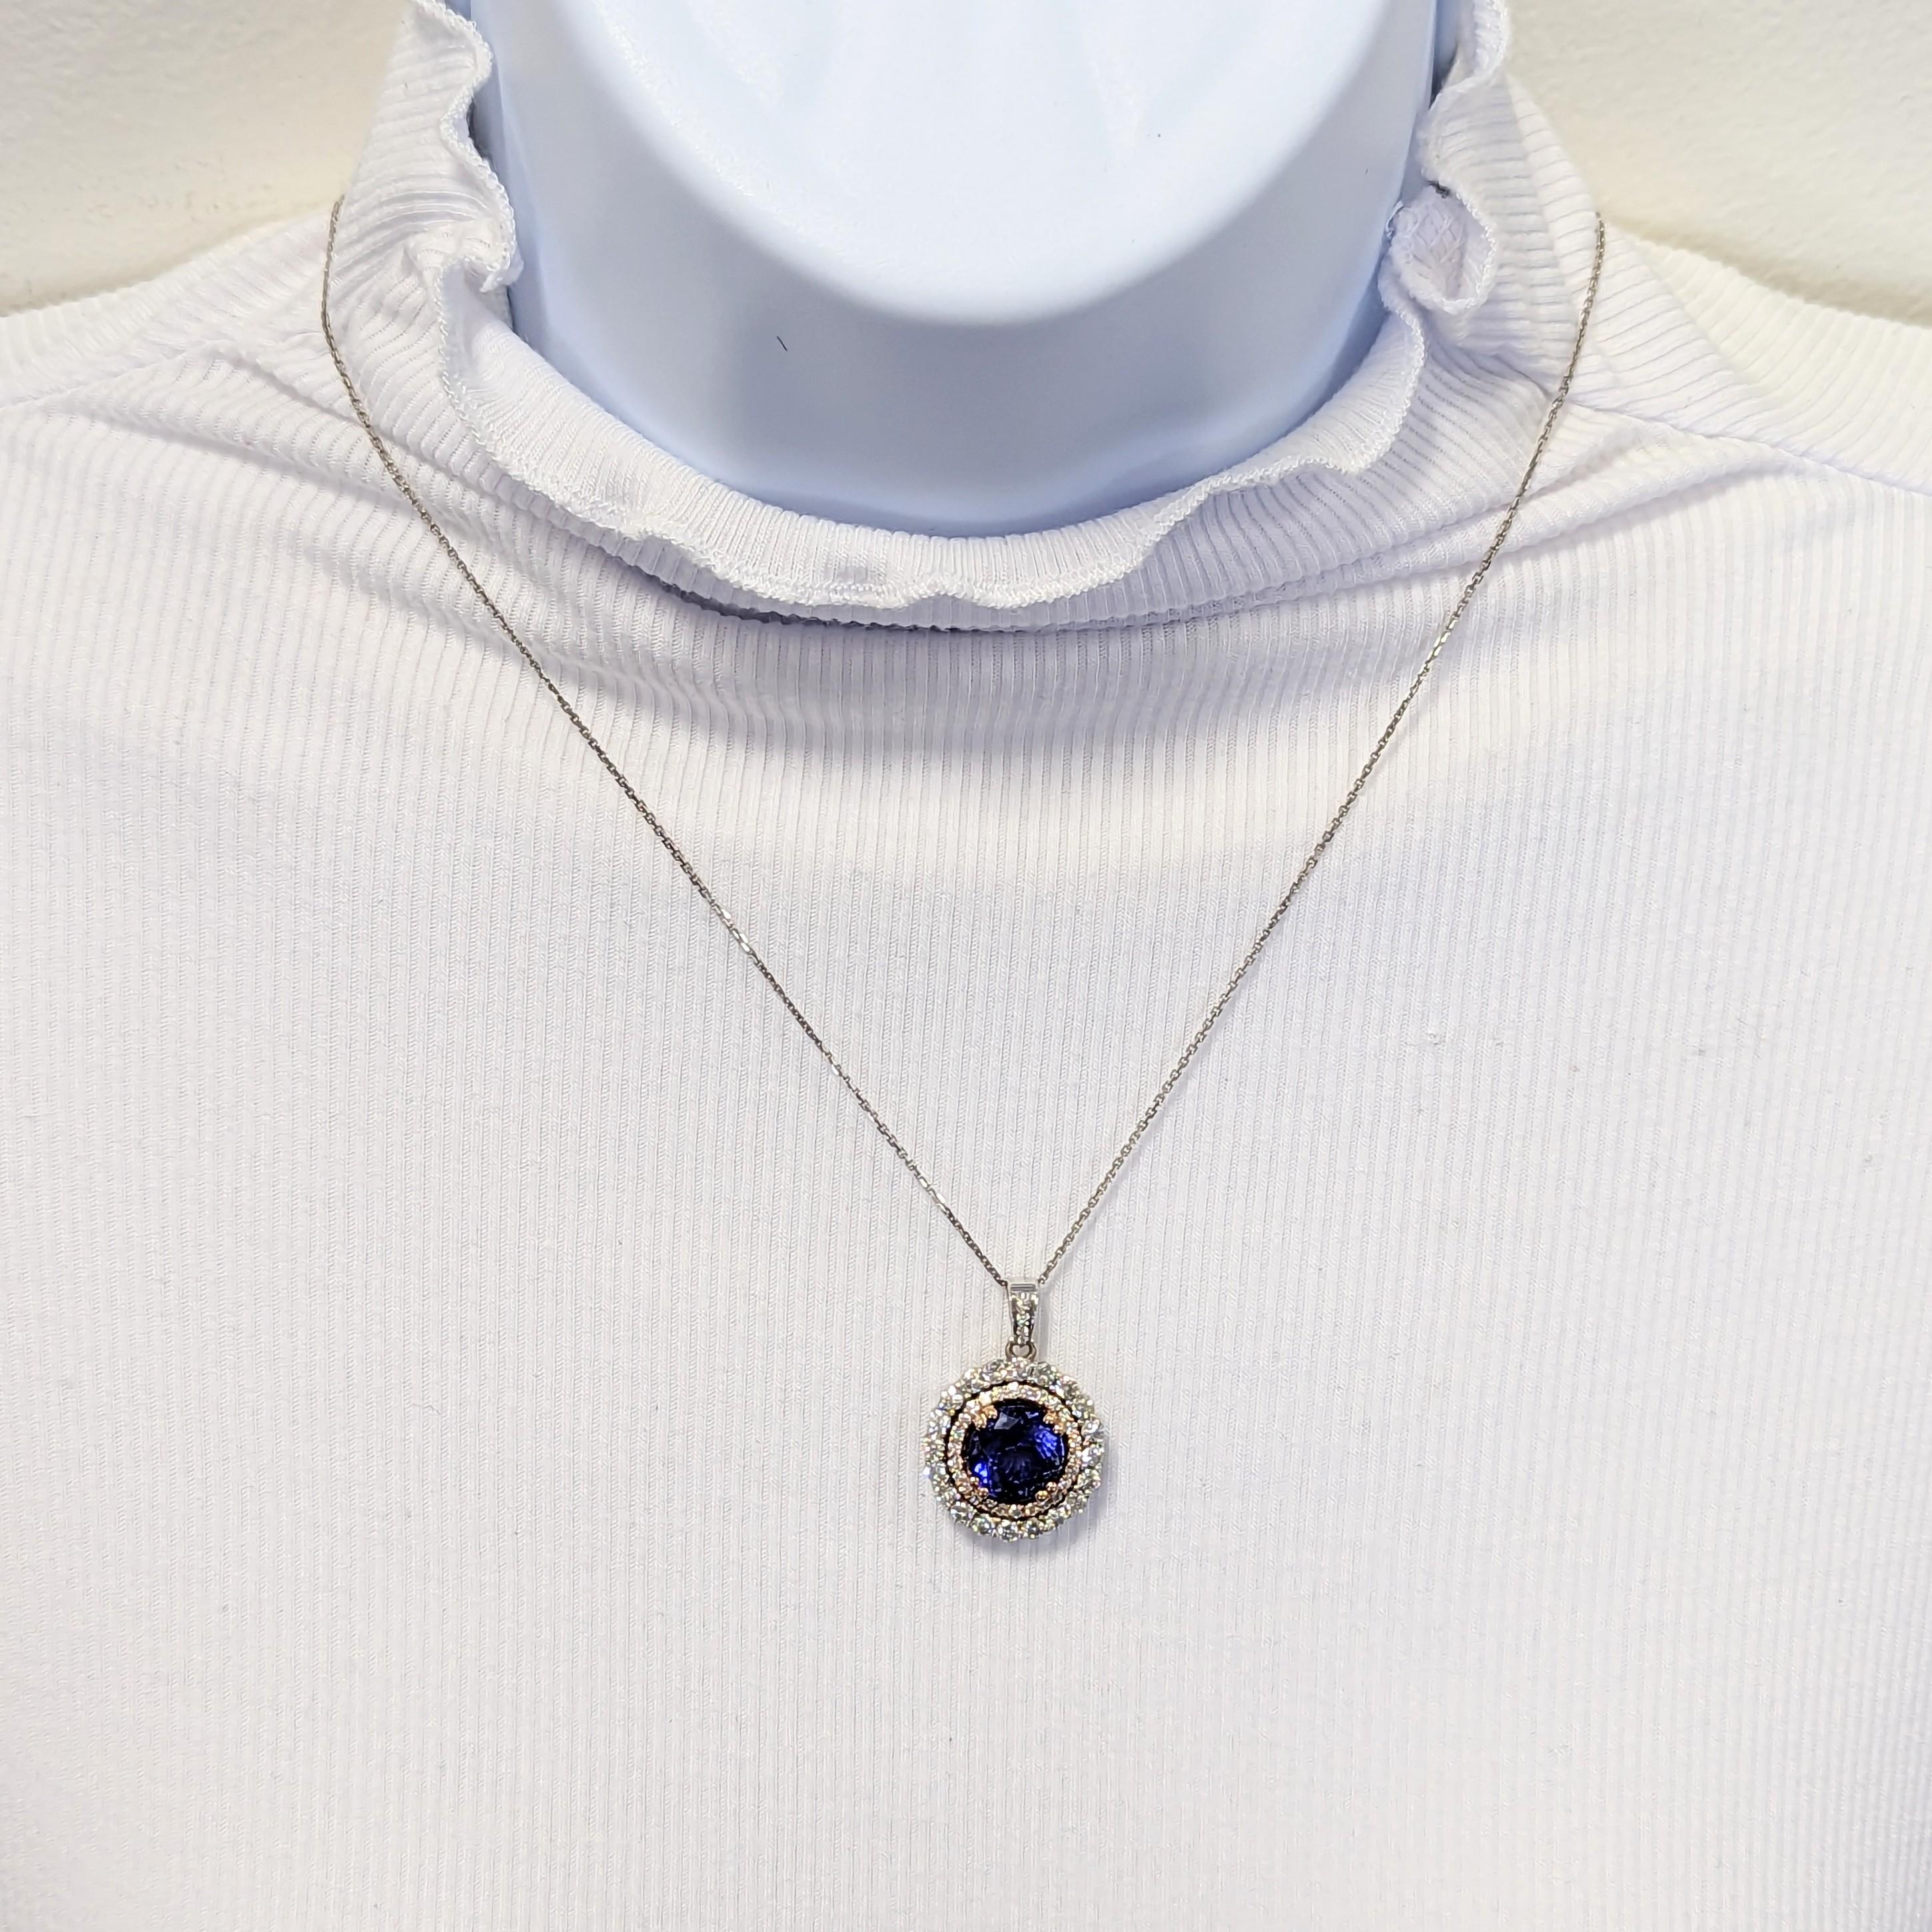 Beautiful 5.98 ct. tanzanite round with 1.60 ct. white diamond rounds.  Handmade in 14k white and rose gold.  Length is 18